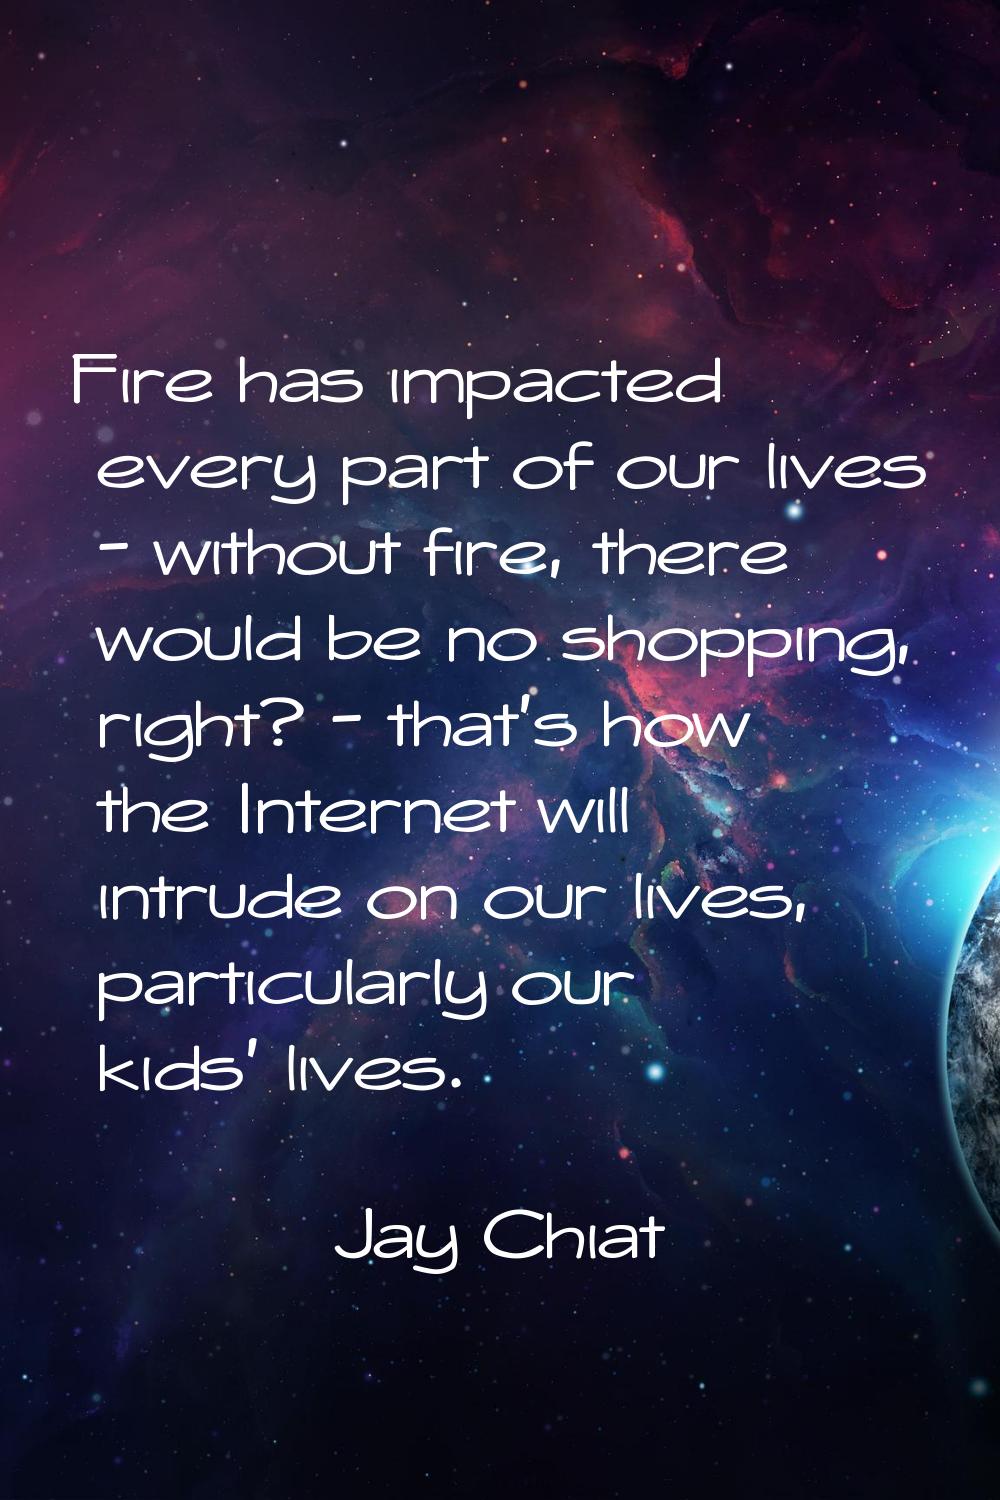 Fire has impacted every part of our lives - without fire, there would be no shopping, right? - that